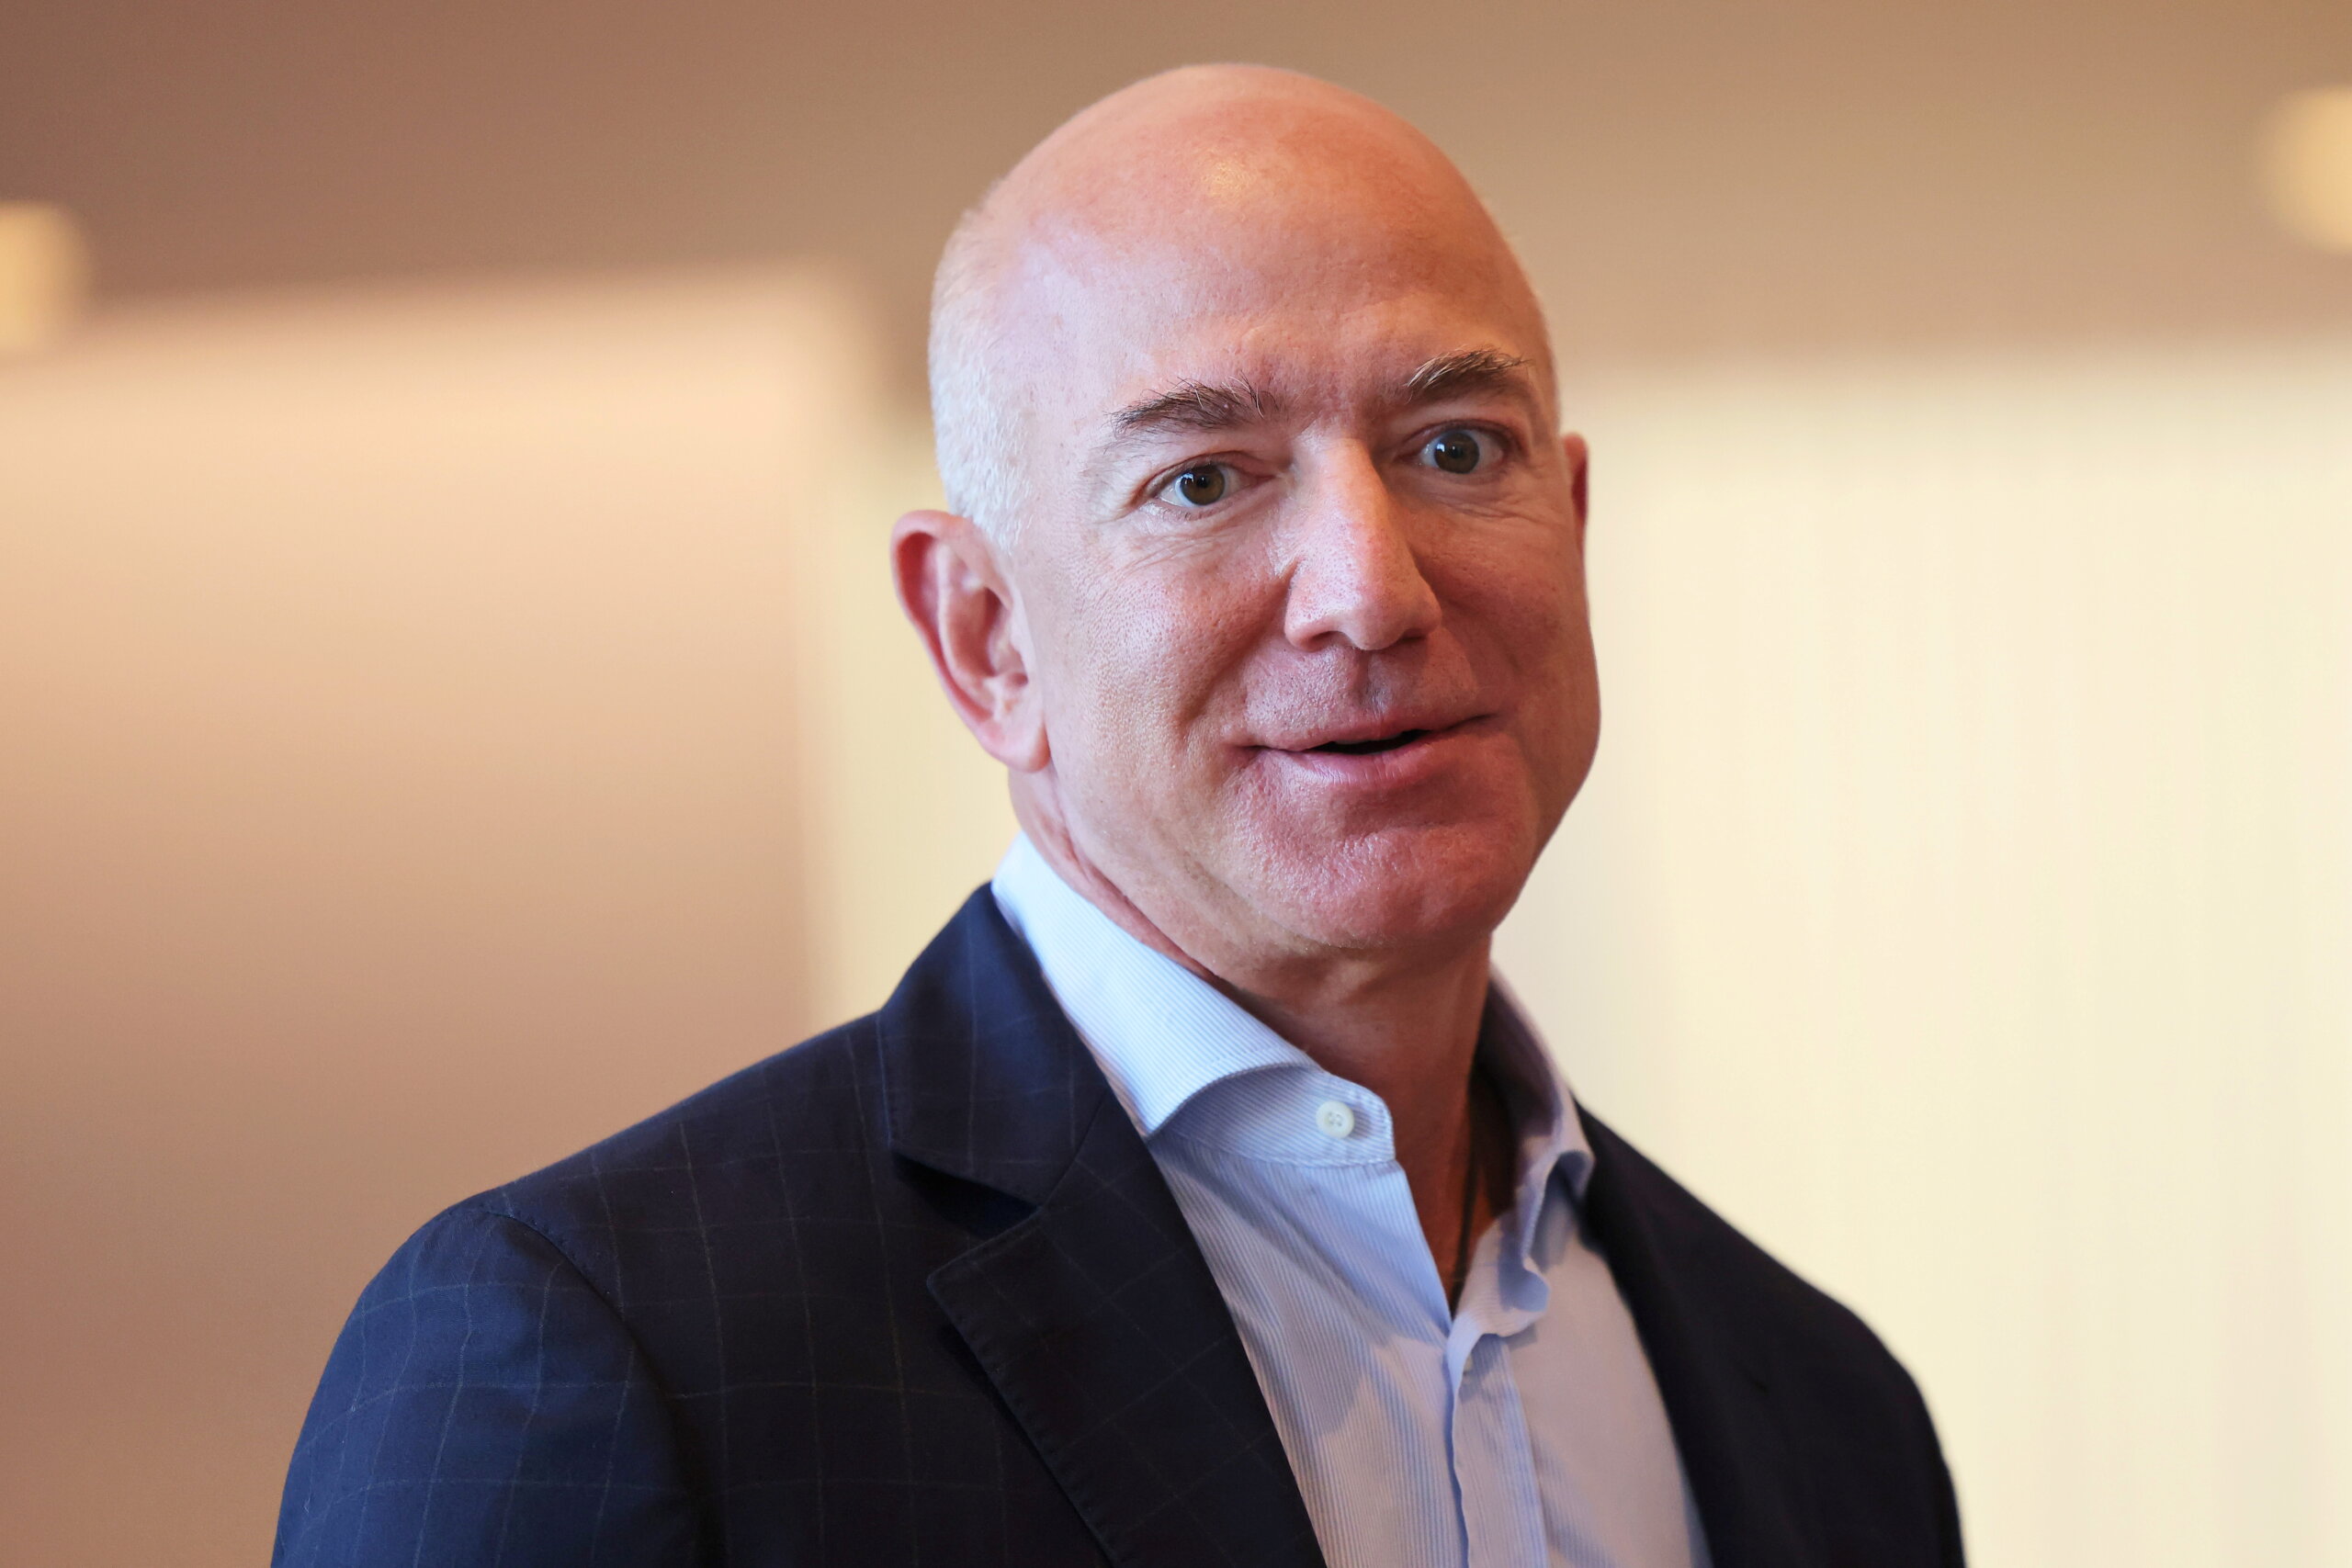 Hitting the Books: How Amazon laundered the ‘delusion of the founder’ real into a commerce empire